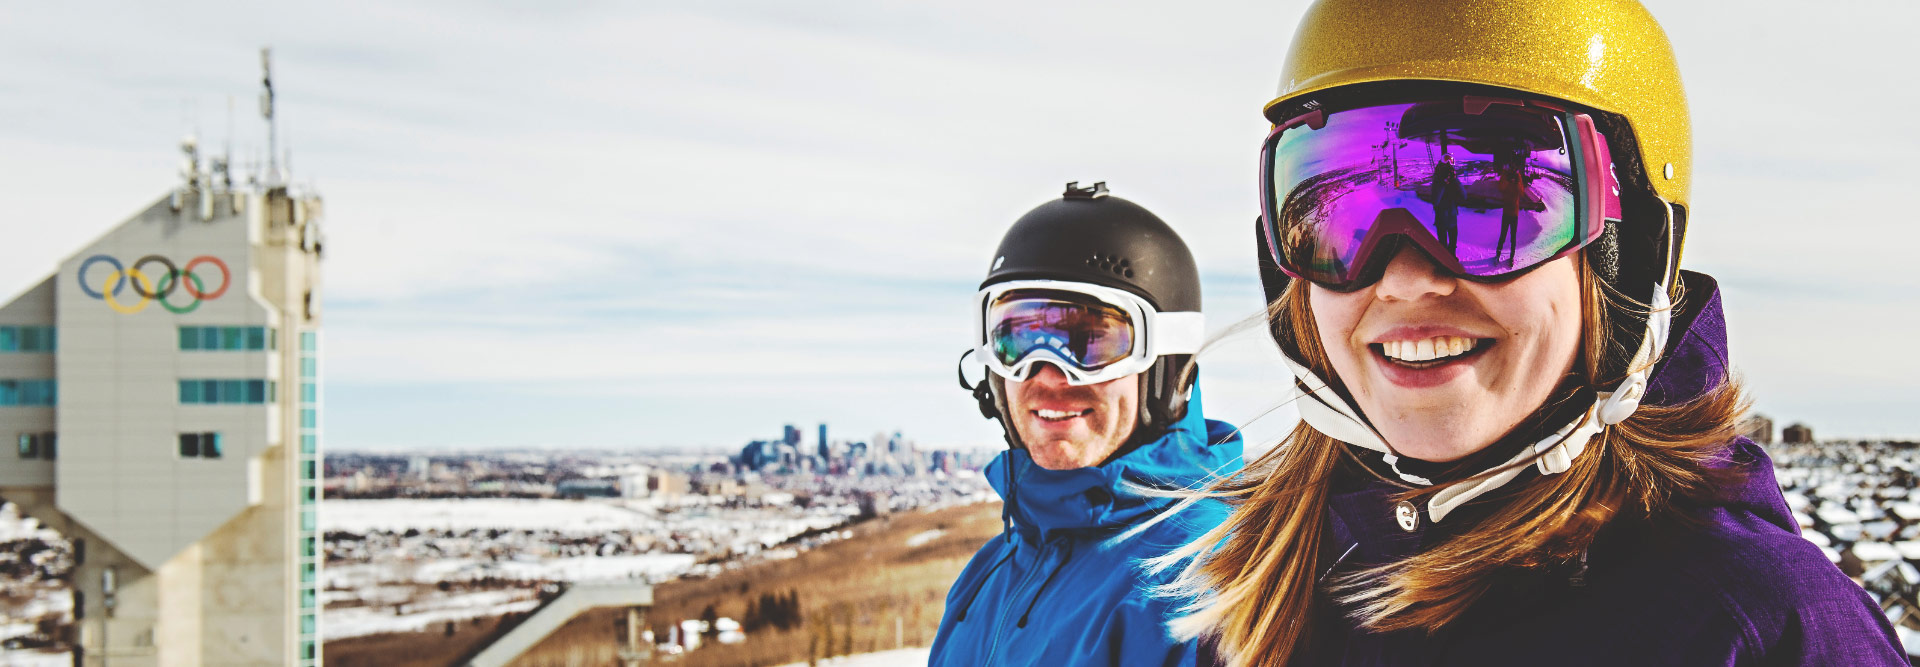 Winsport Skiing and snowboarding in the city